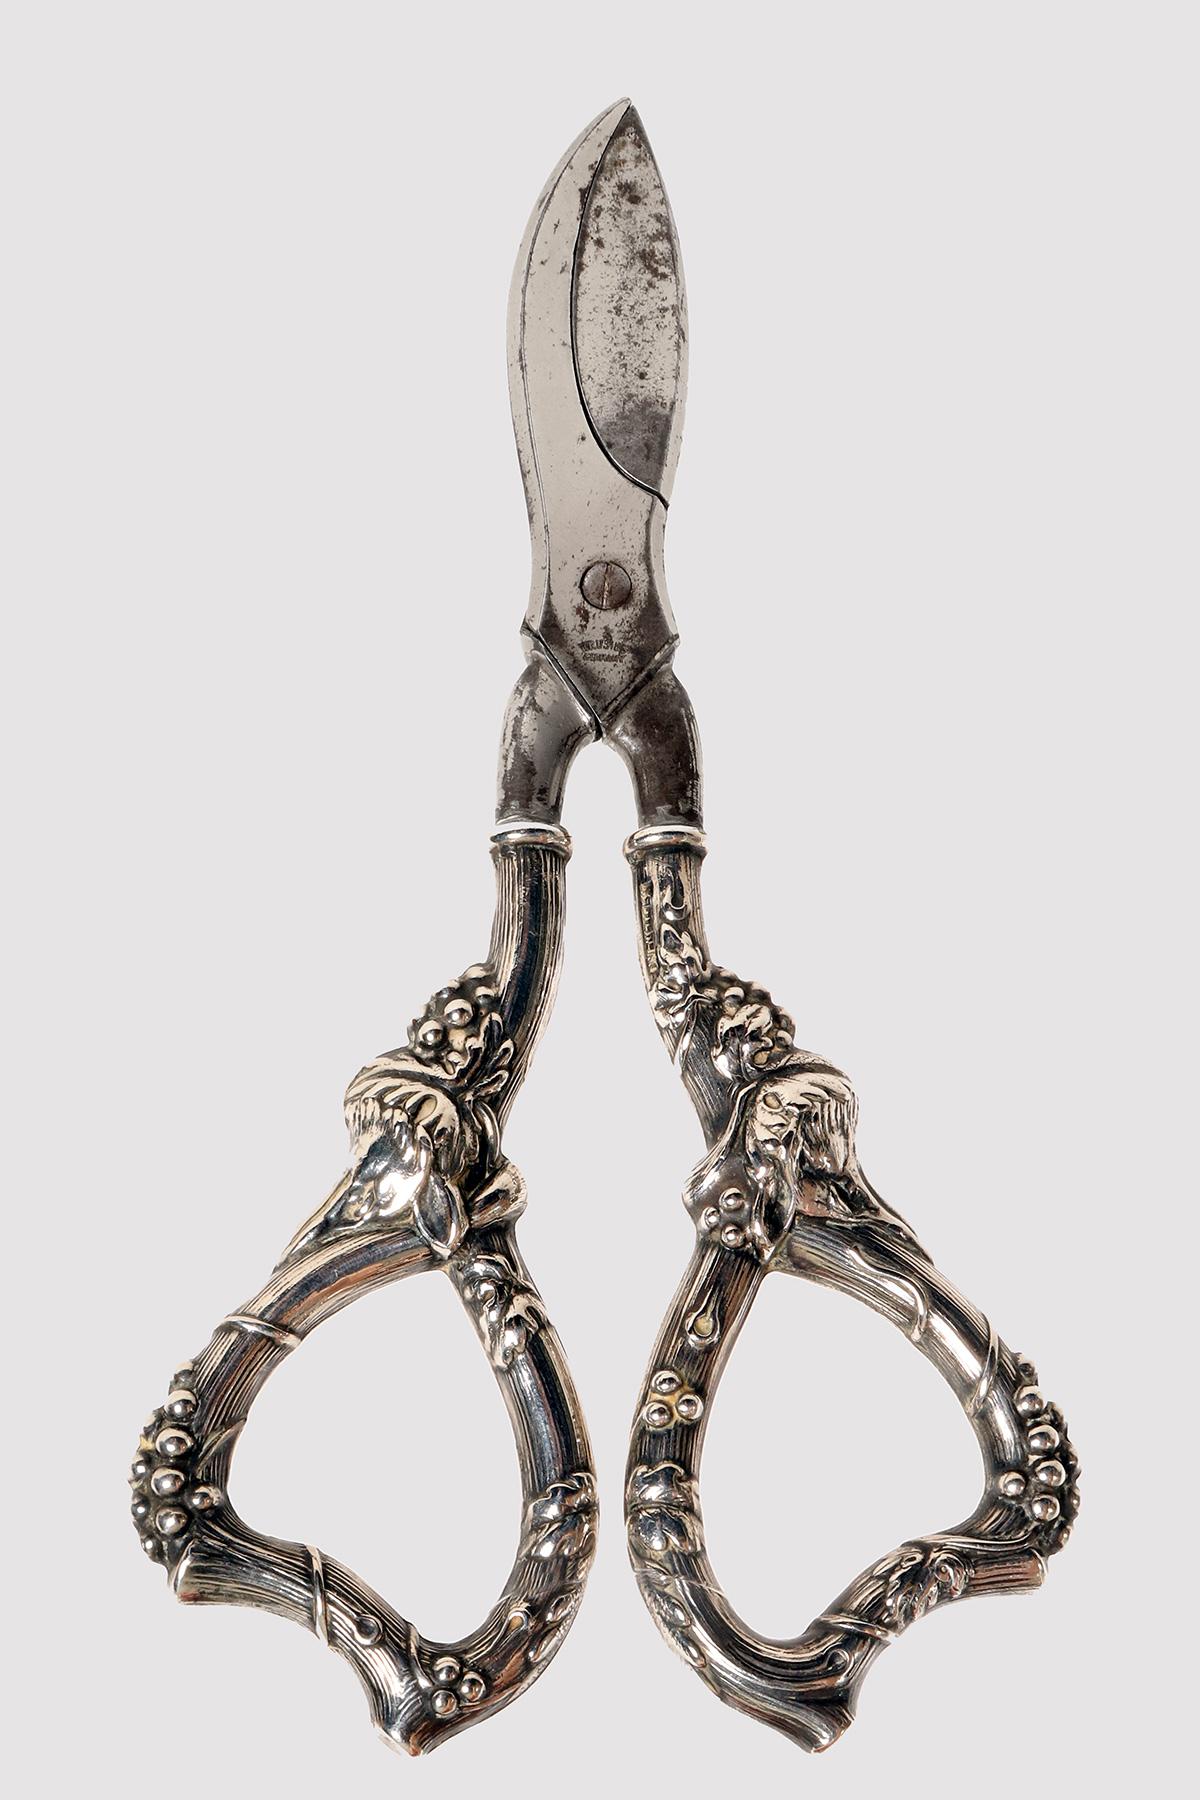 Pair of antique grape shears, Krusius Brothers, made of sterling silver with the motif of grapes, grape leaf, vine in three dimensions with fox heads. These shears are made in Germany and were popular in the Victorian era, as they were used to cut a